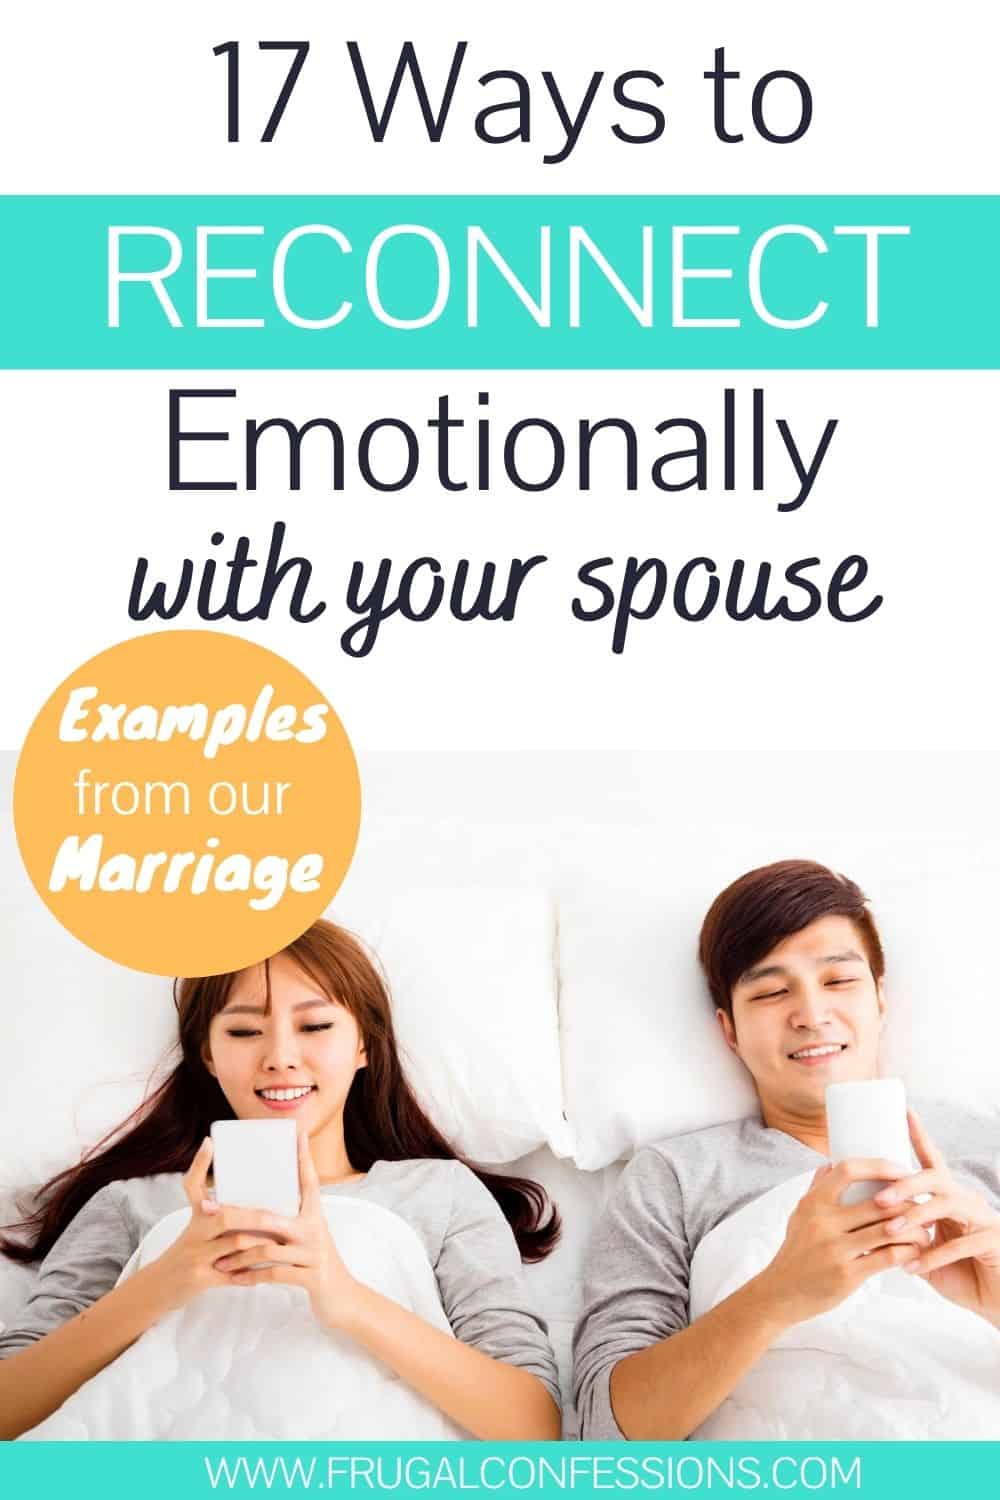 married couple in bed together with smartphones, text overlay "17 ways to reconnect emotionally with your spouse"